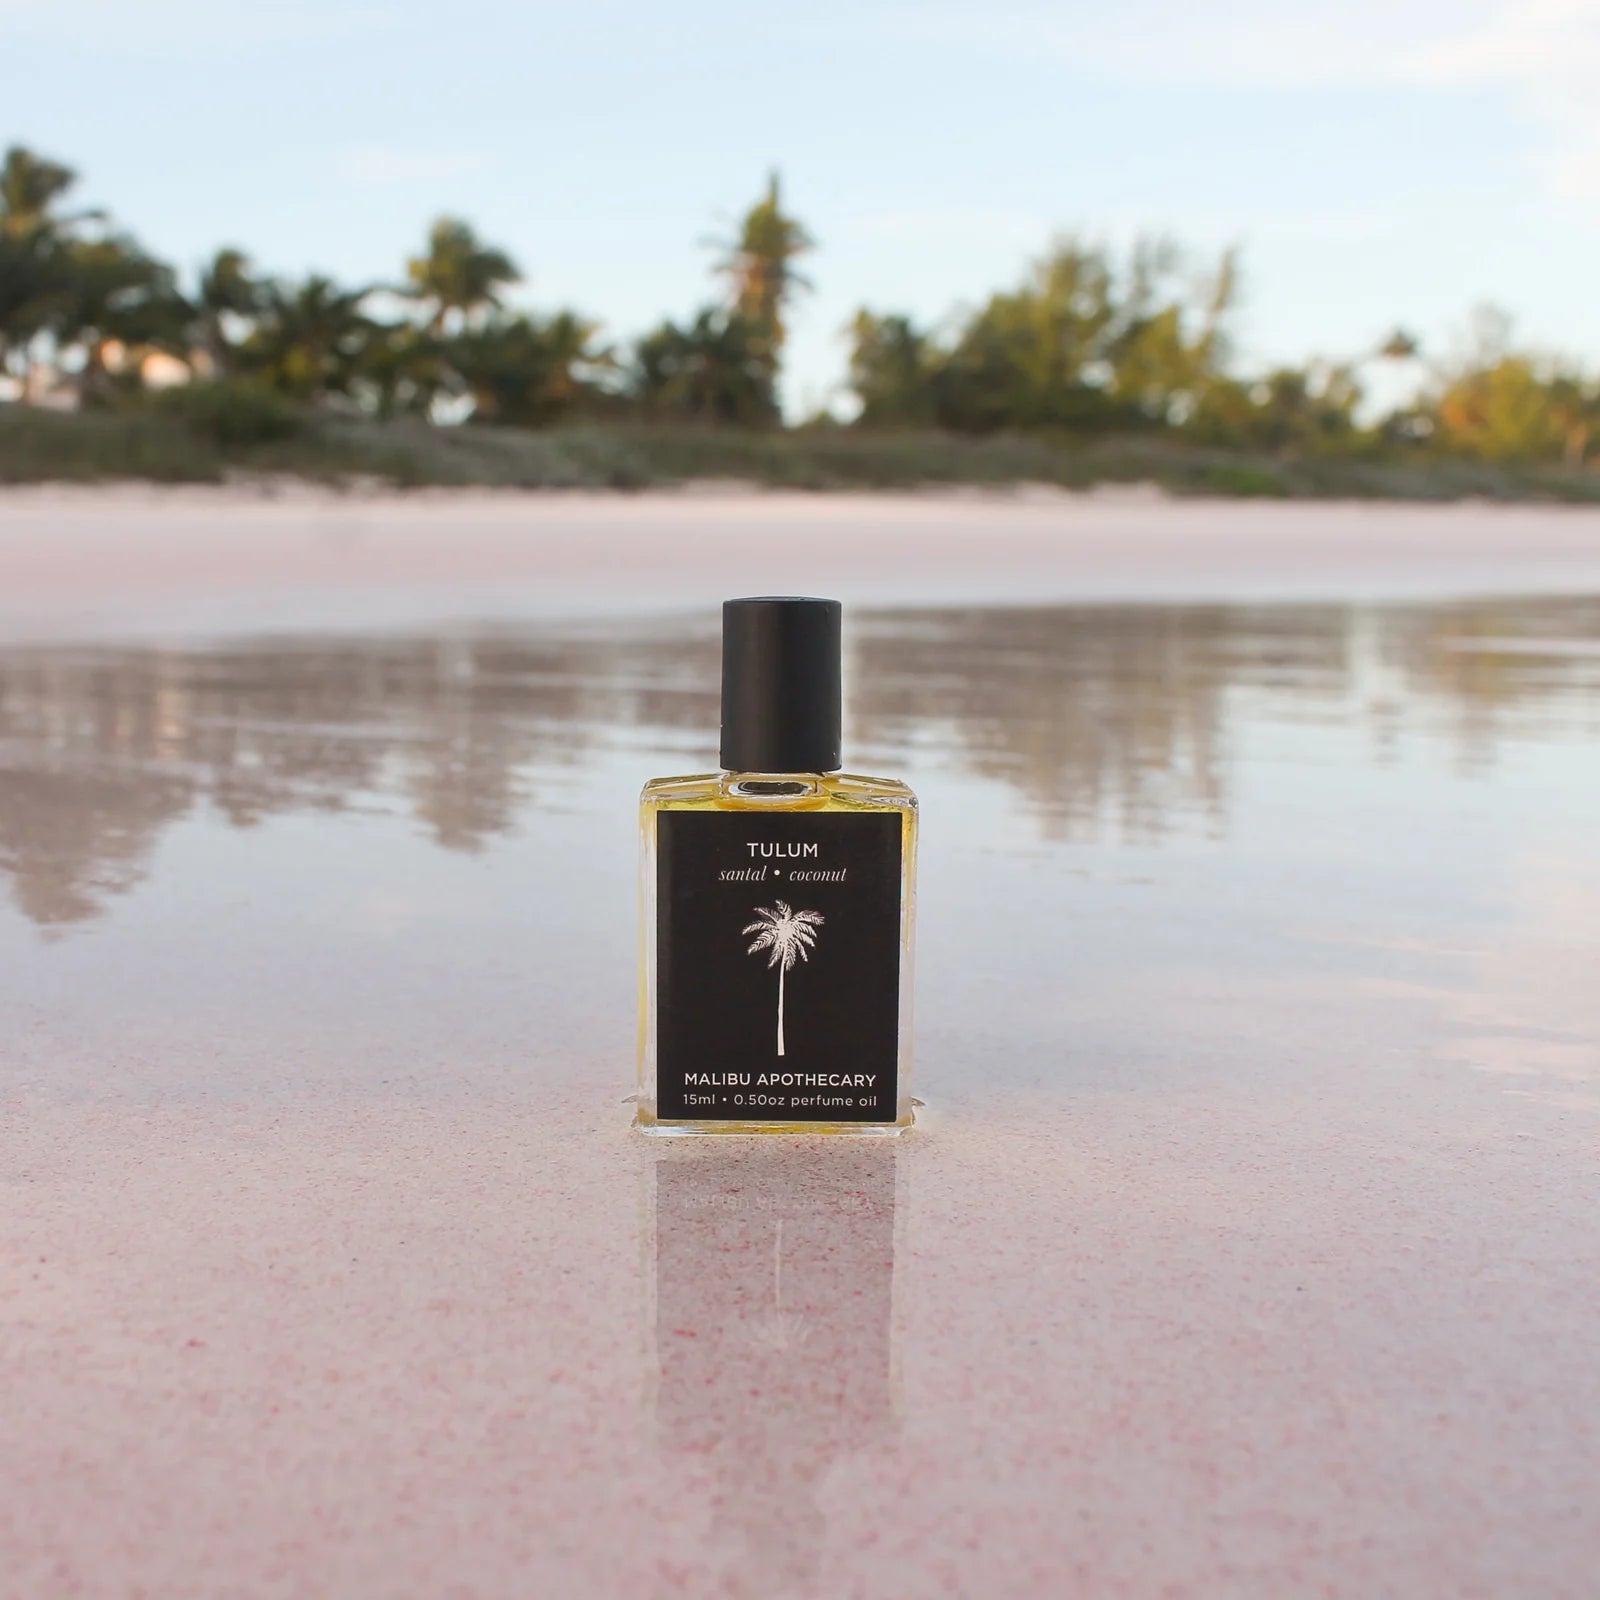 A bottle of "Soleil Roller Parfum" by Faire is placed on a reflective wet sand at sunset, with pink hues in the background and a palm tree silhouette on the bungalow-style bottle.